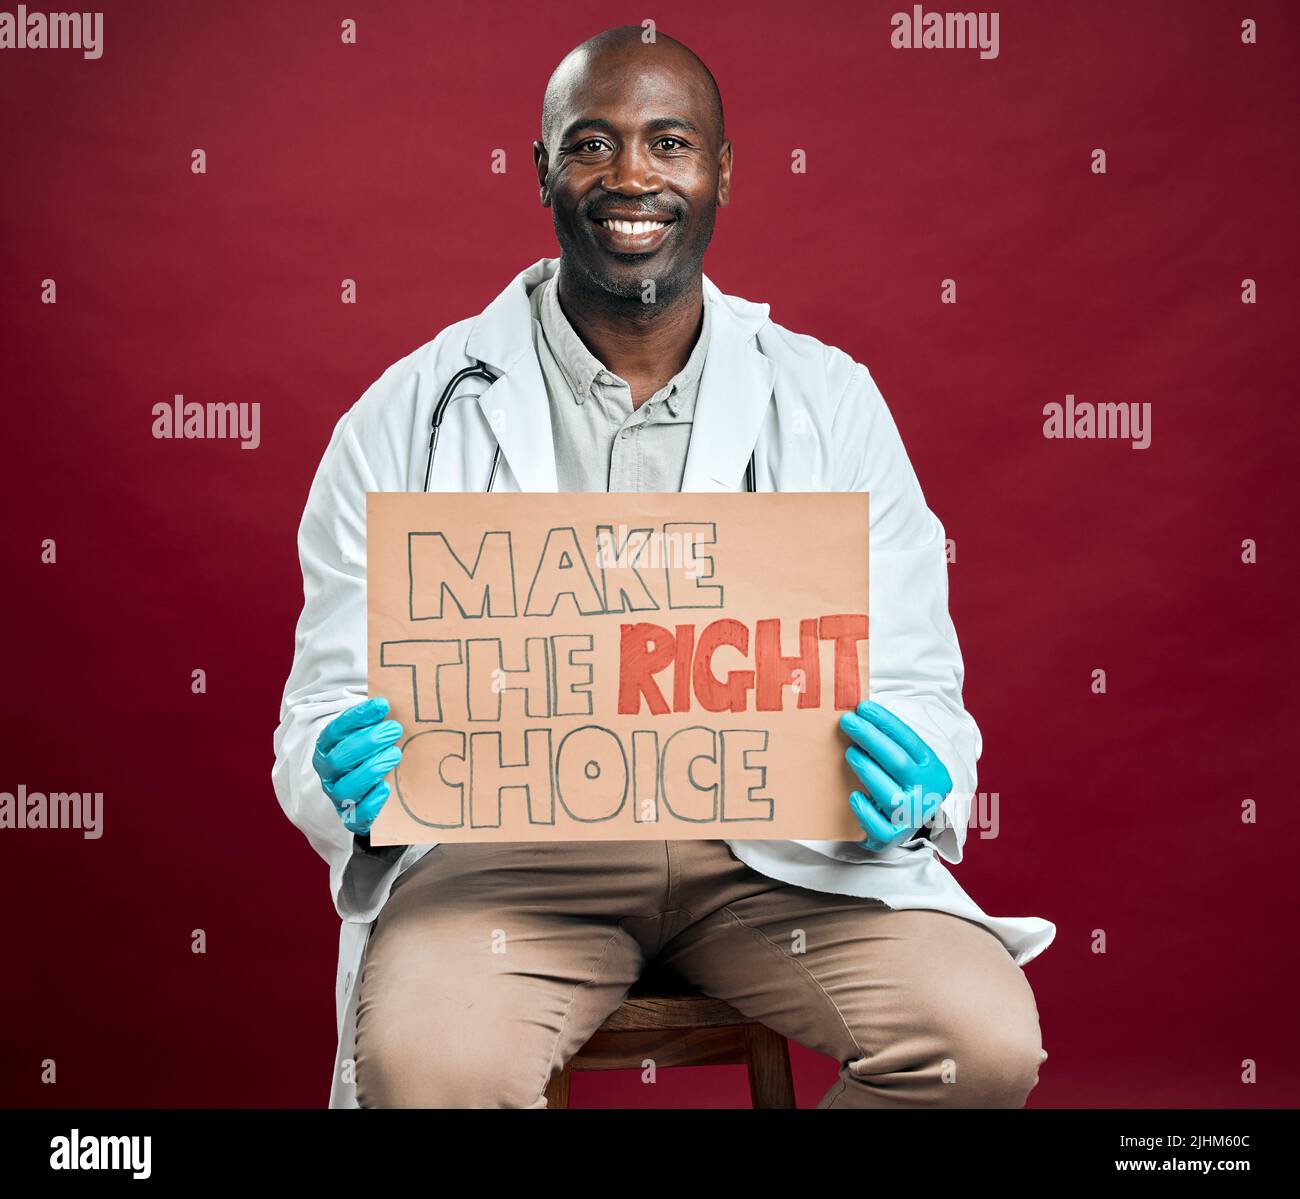 African american covid doctor holding and showing poster. Portrait of smiling black physician isolated on red studio background with copyspace. Man Stock Photo